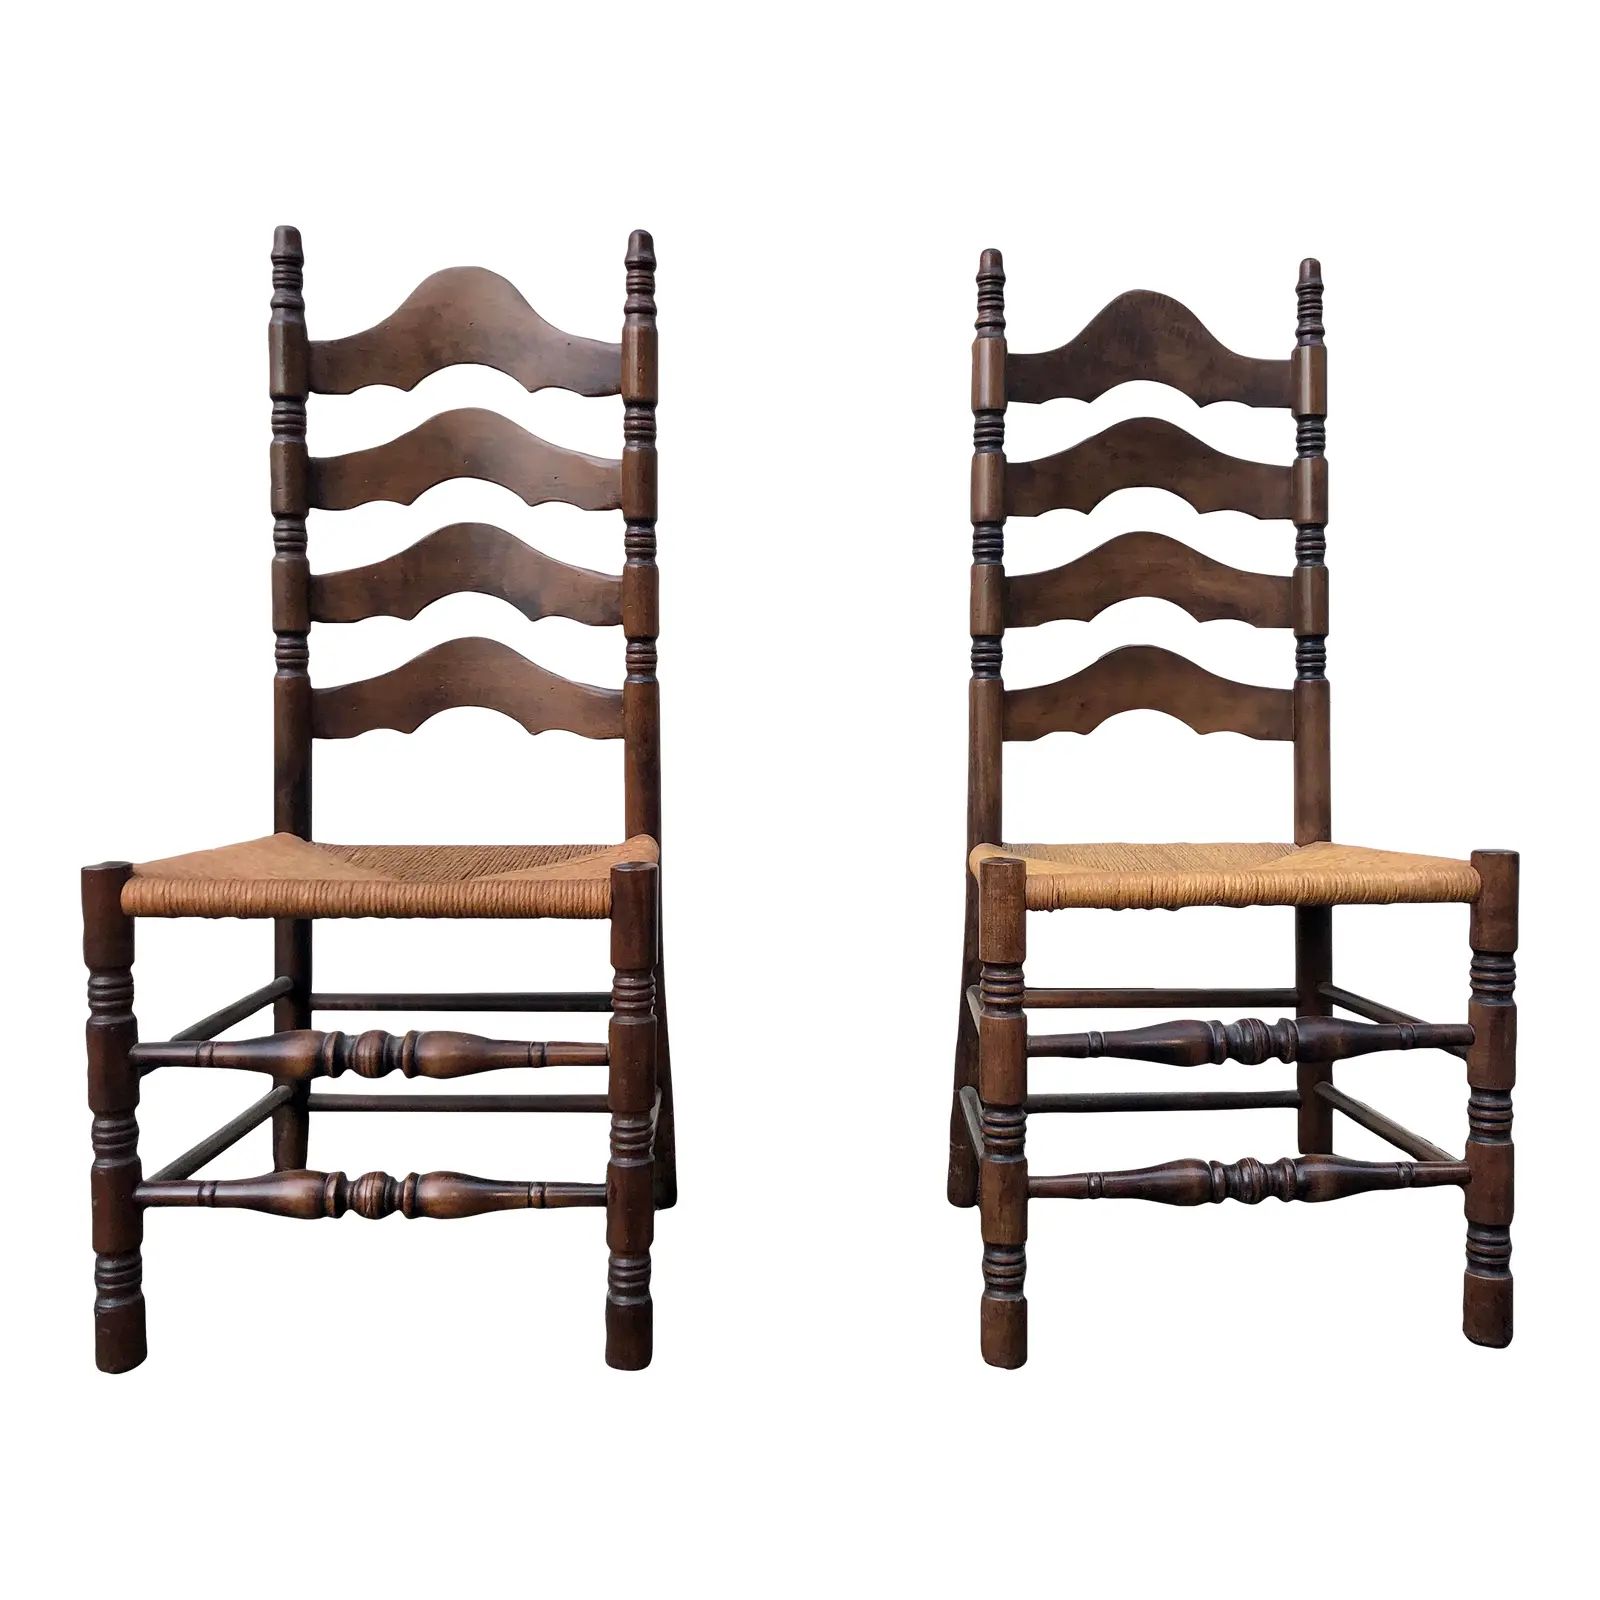 Vintage French Country Style Ladder Back Chairs - Set of 2 | Chairish